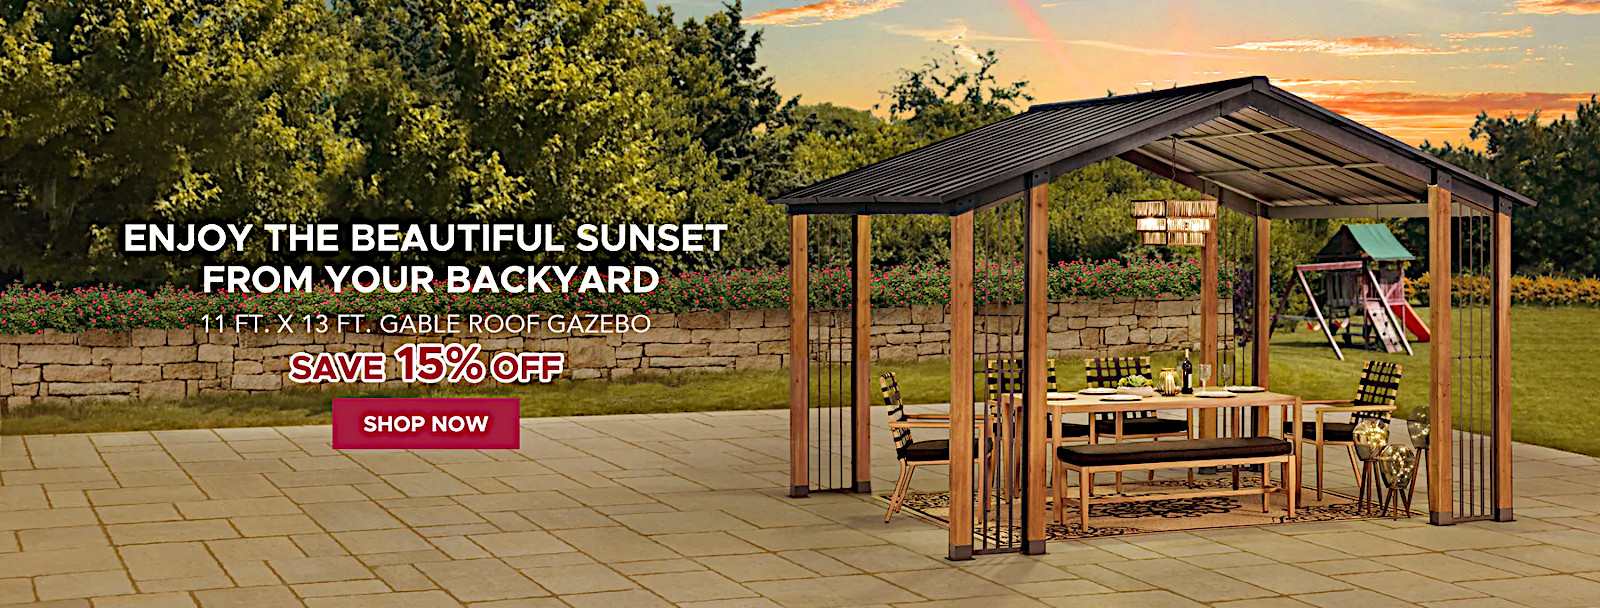 gable roof gazebo at a discount